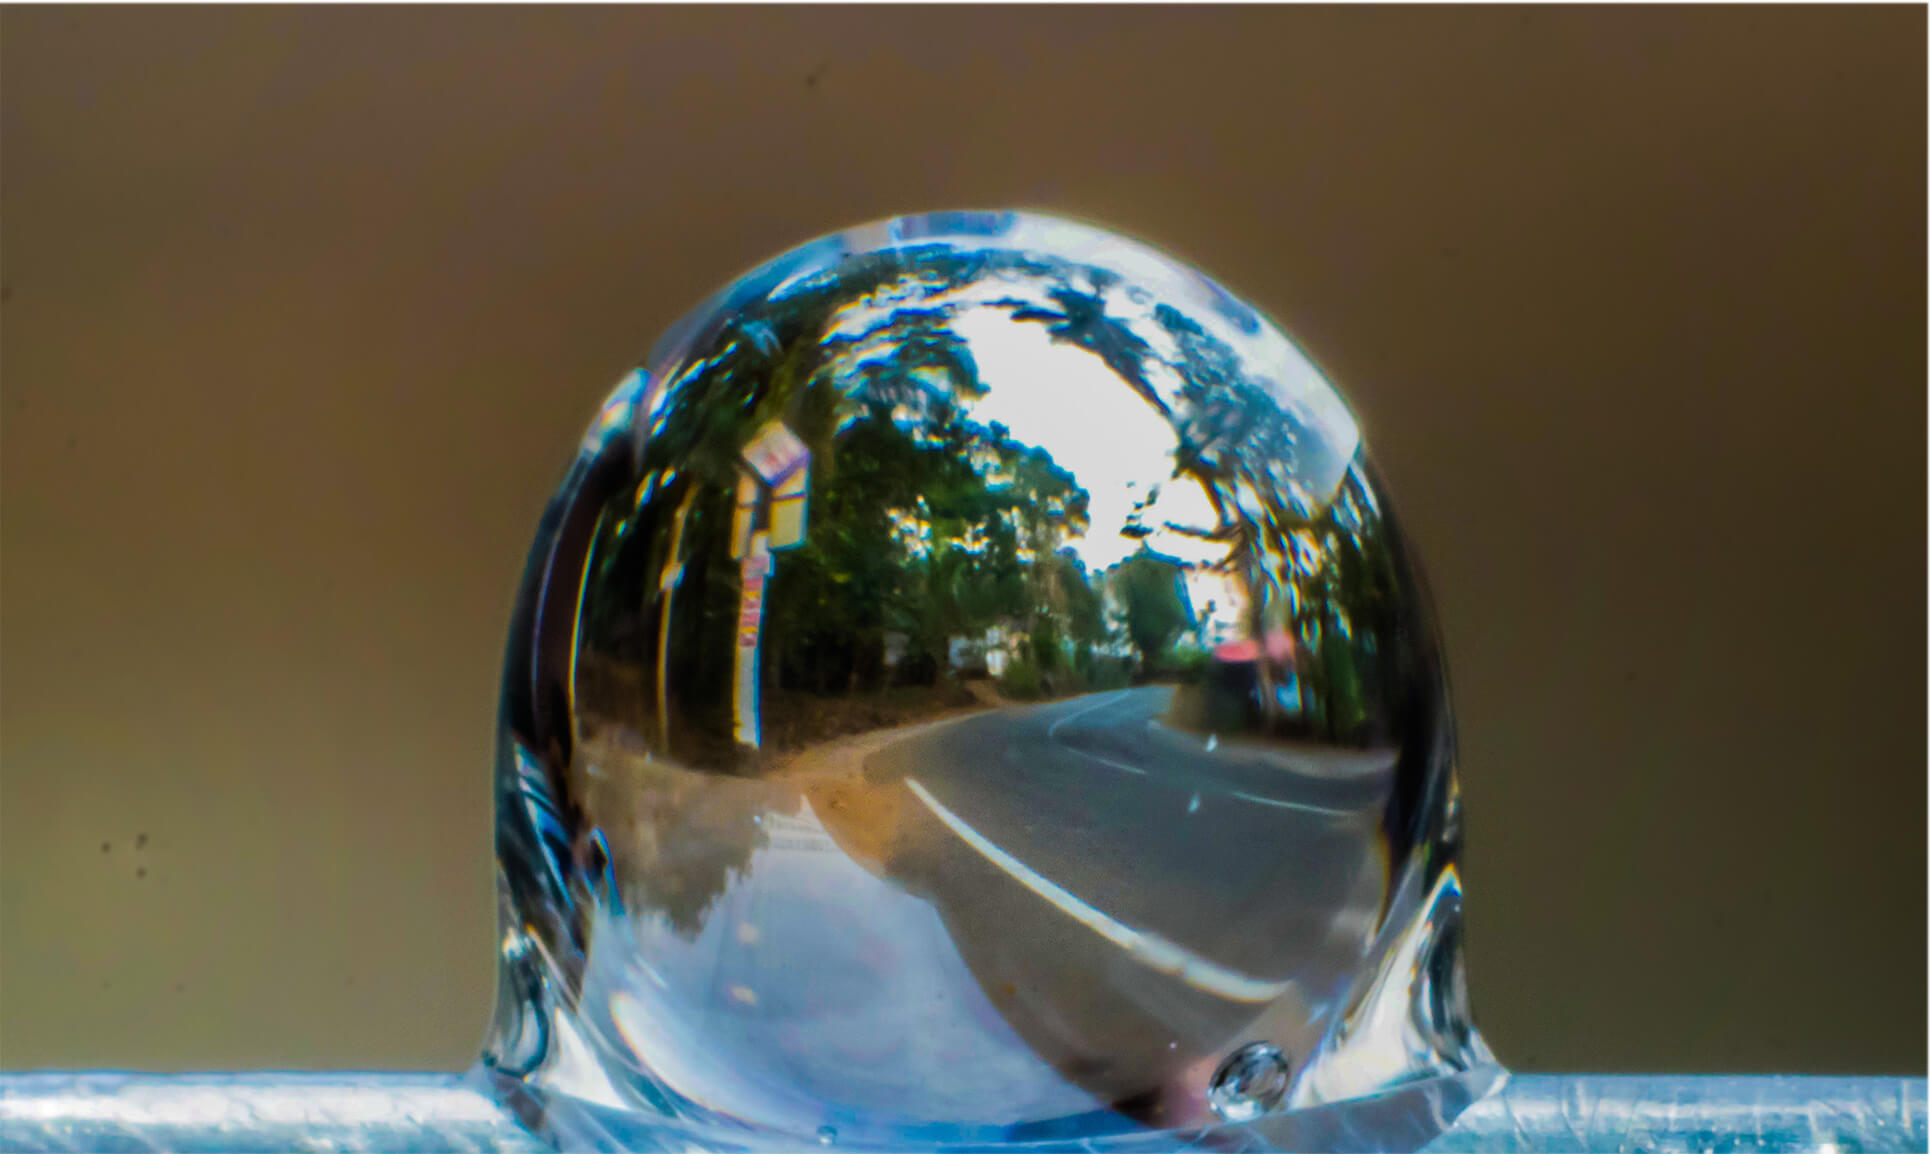 bubbles-perspective-photomentor